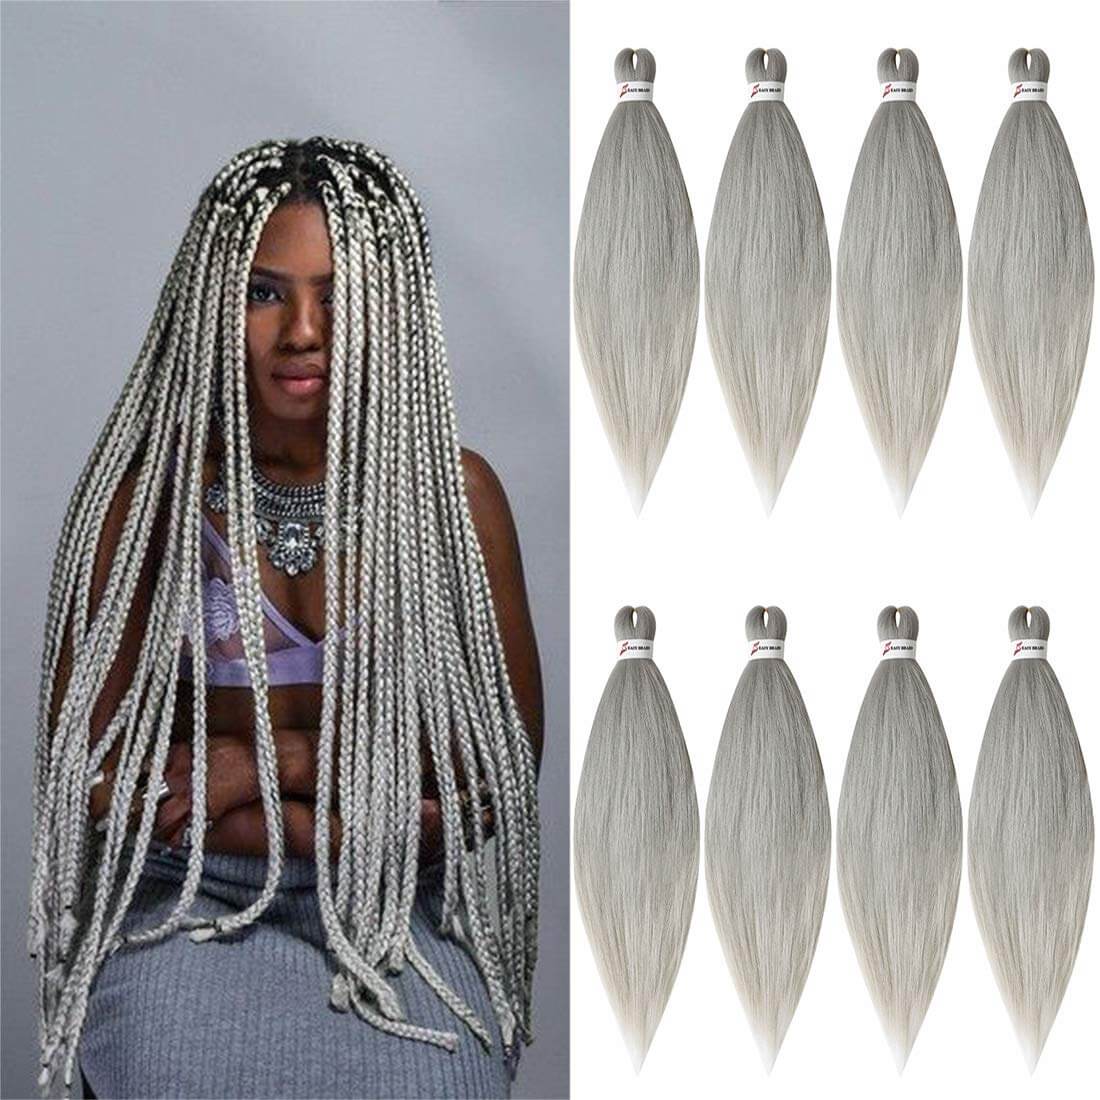  Pre Stretched Braiding Hair Ombre Black Silver Grey